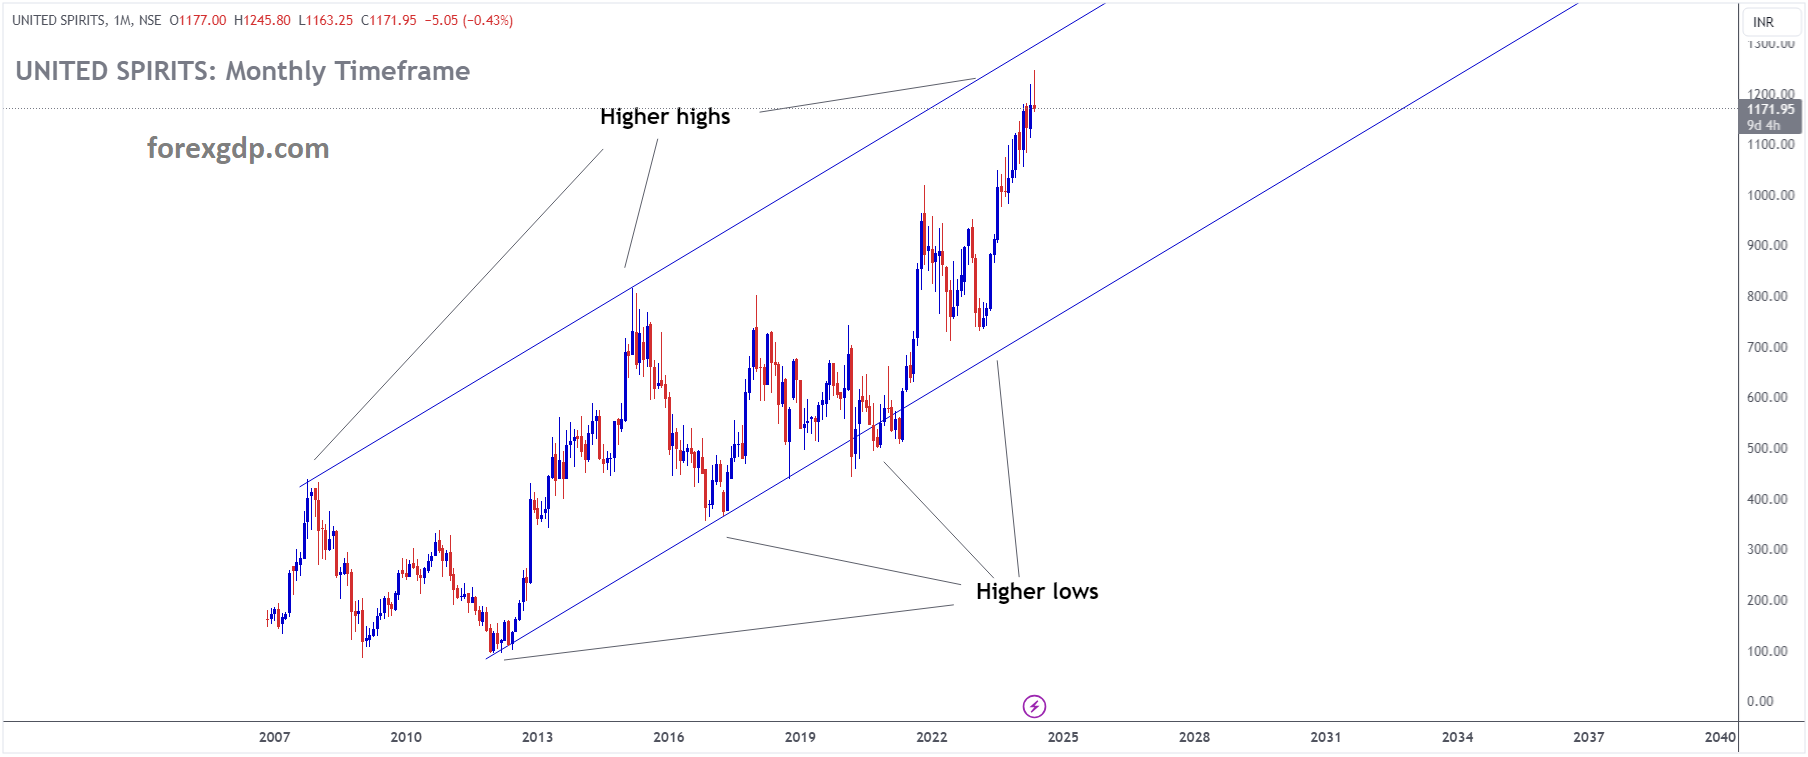 UNITED SPIRITS Market price is moving in Ascending channel and market has reached higher high area of the channel